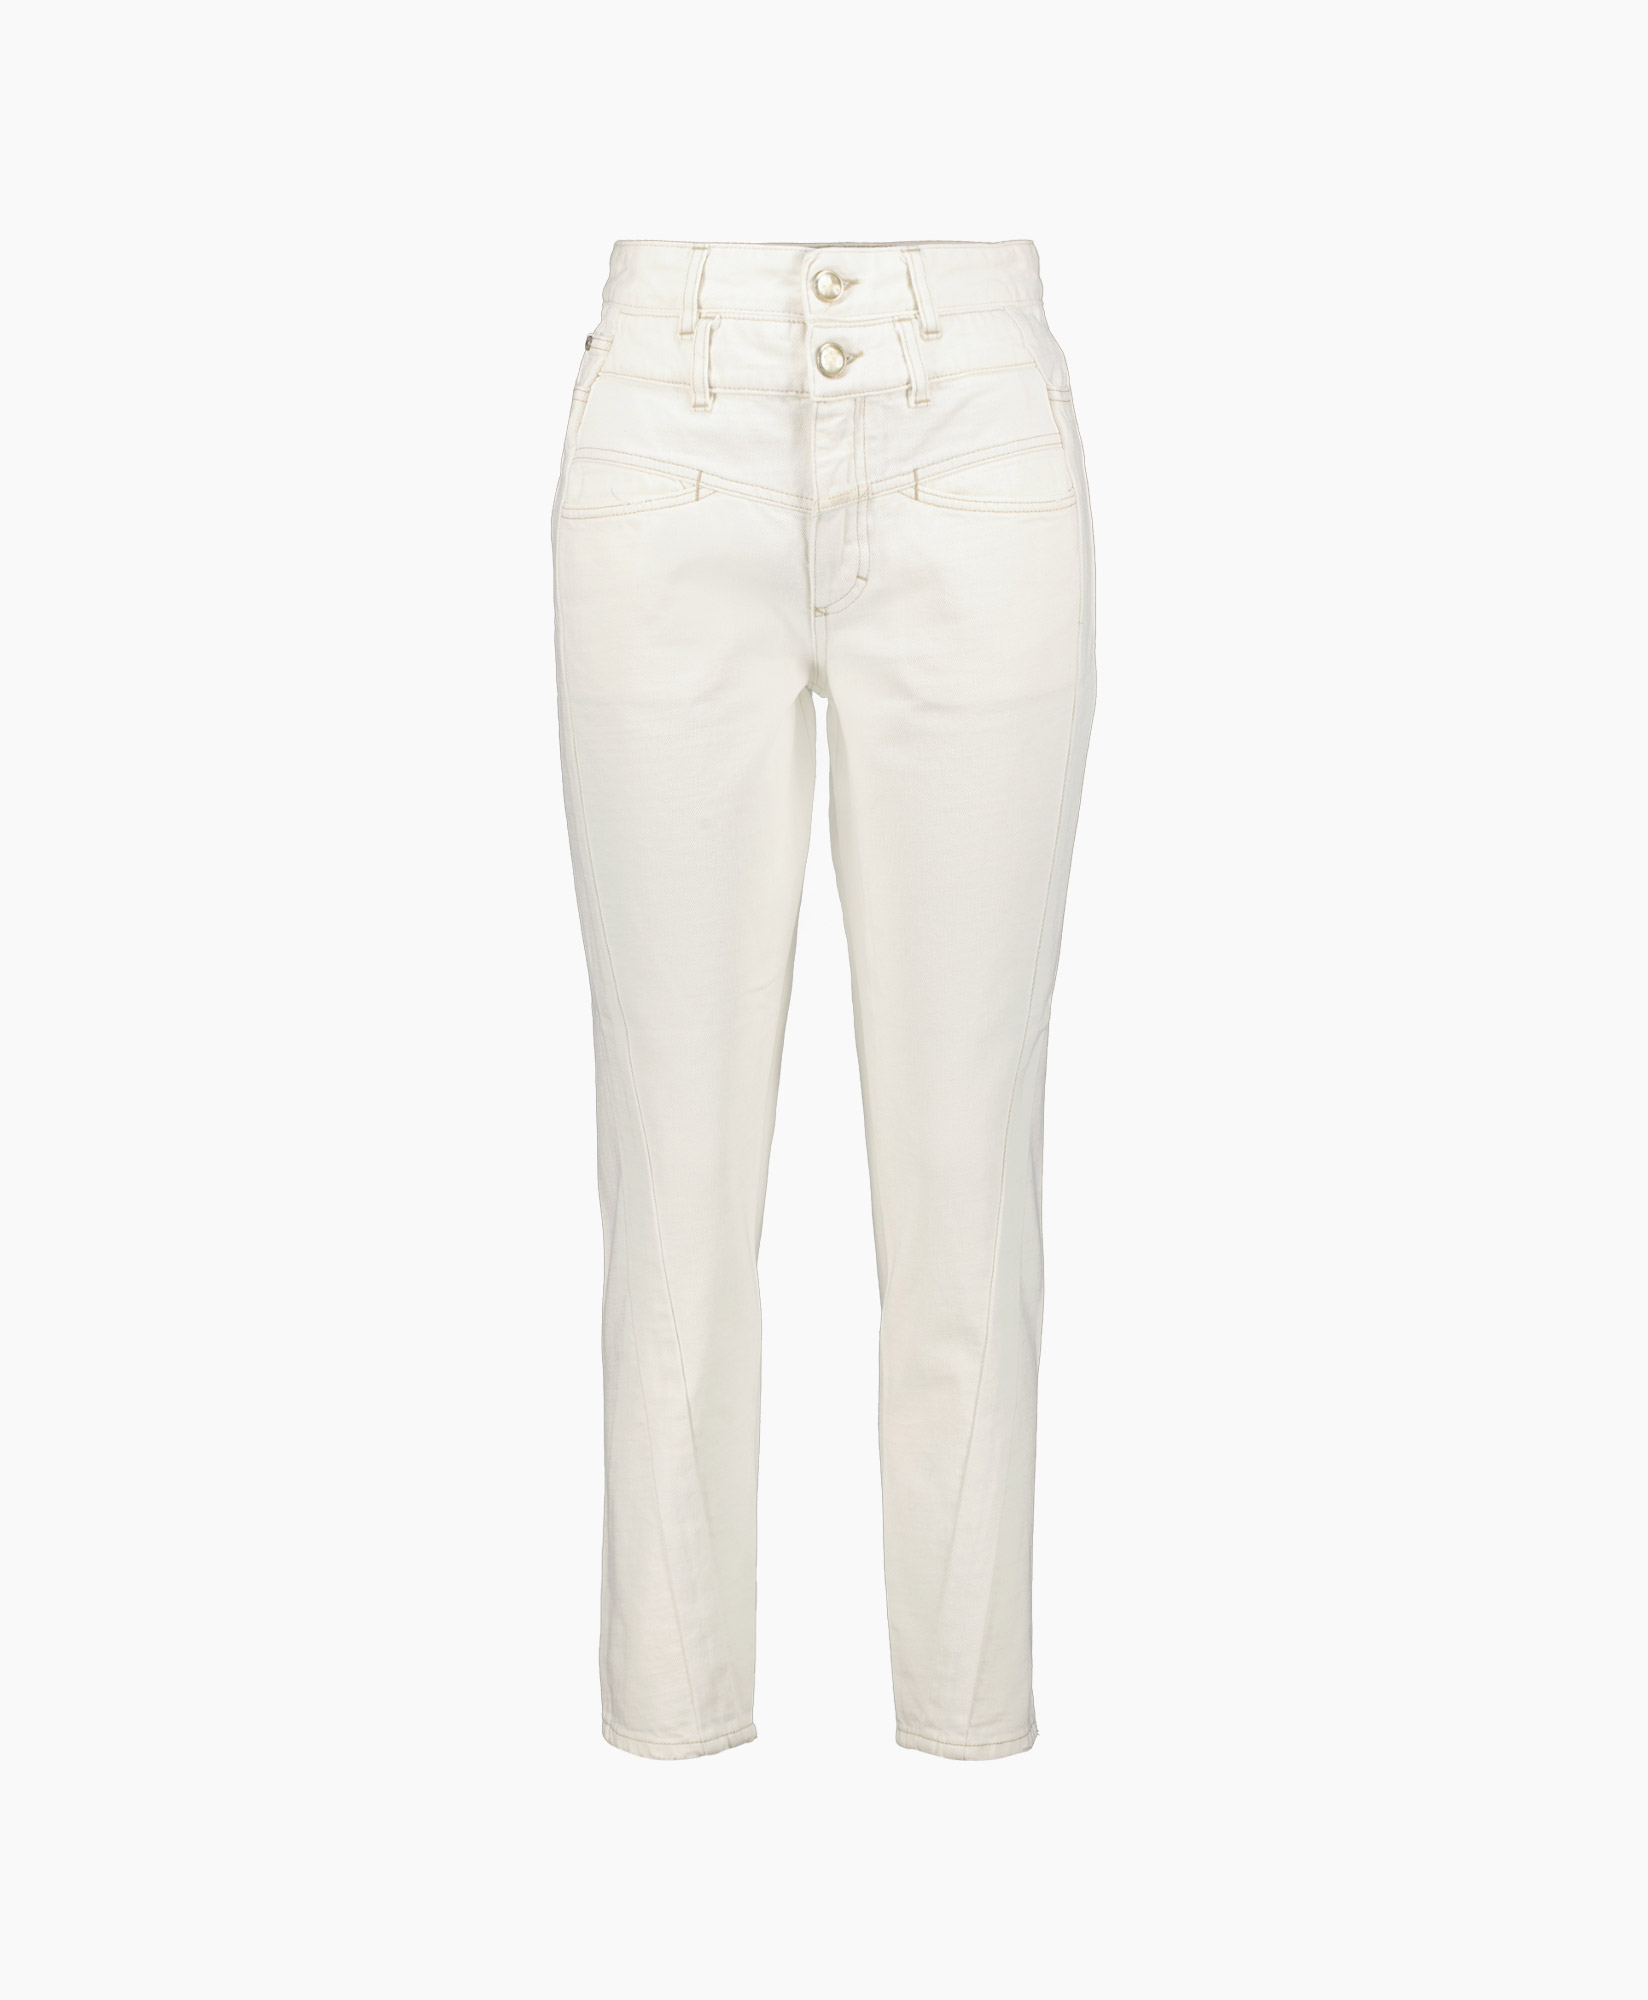 Ontvangst terugvallen Seminarie Closed Jeans Curved-x Off White